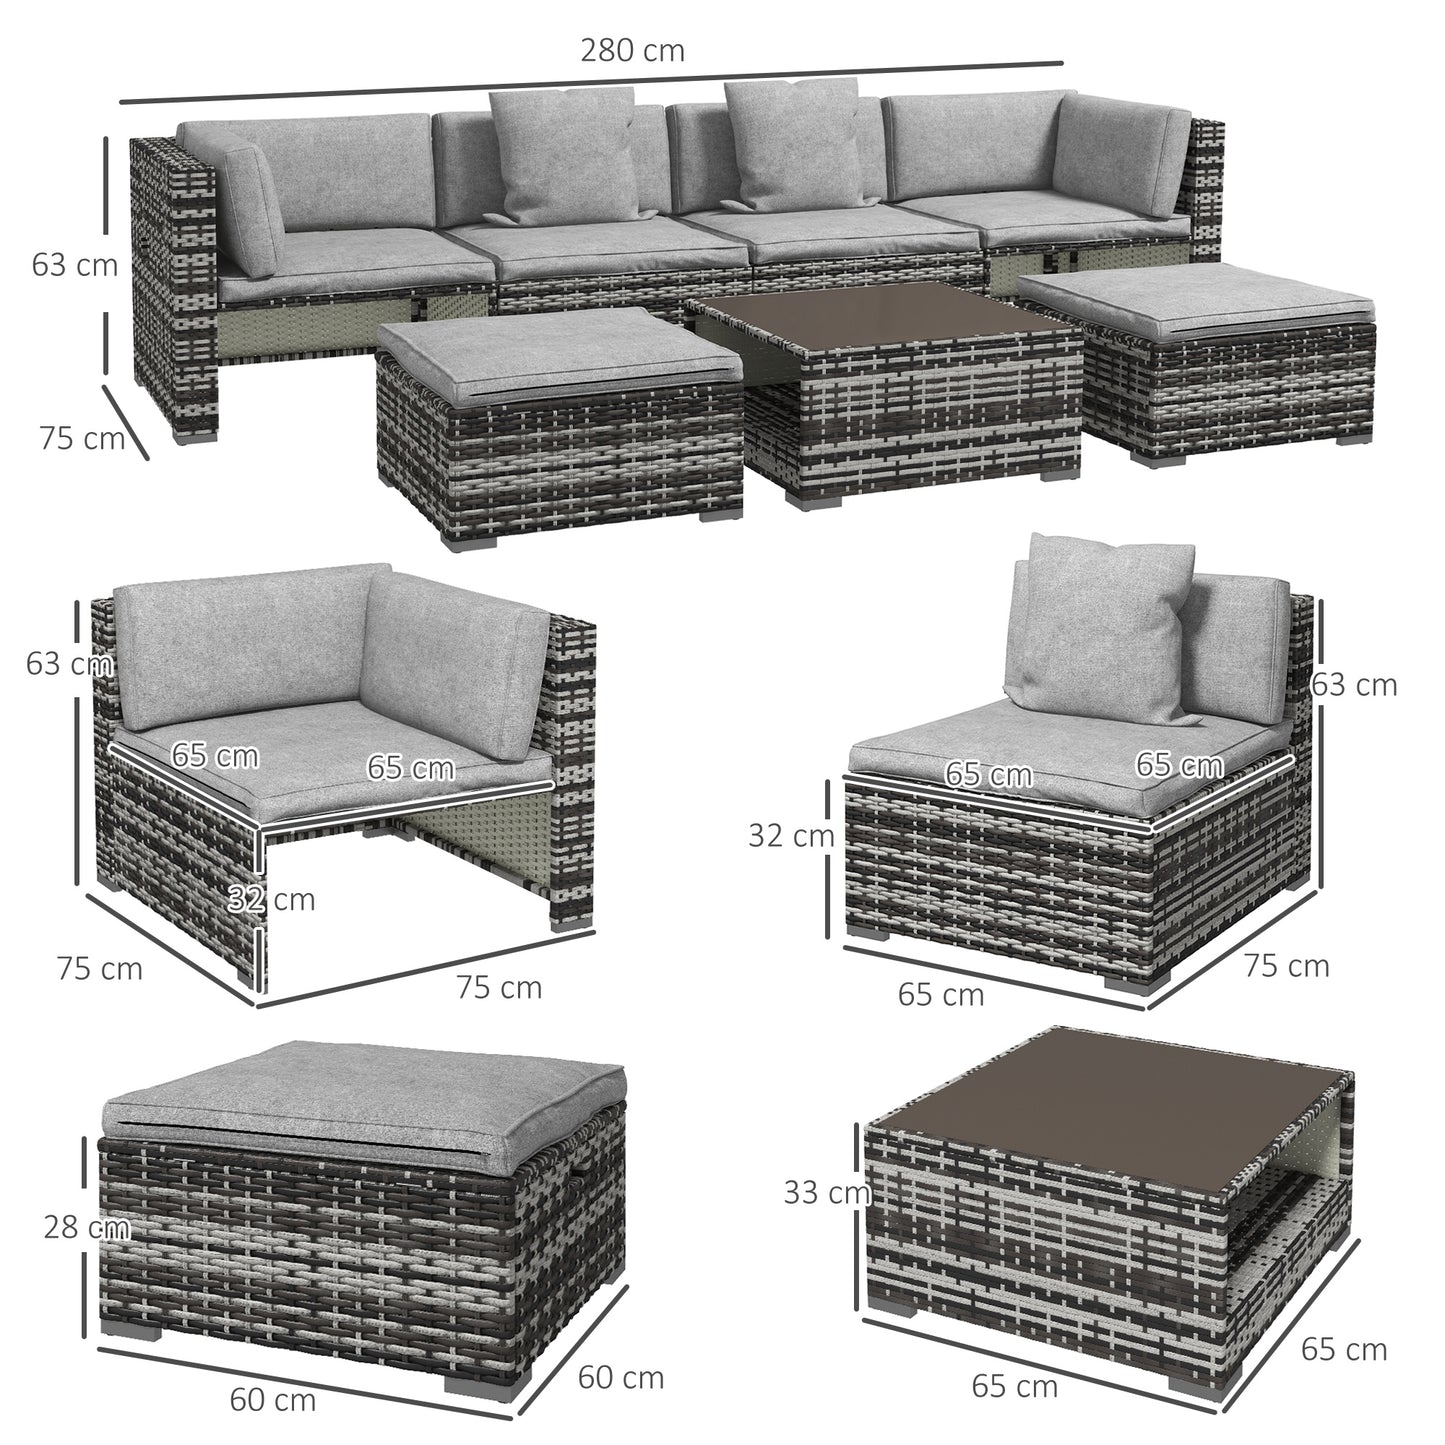 Outsunny 7-Piece Rattan Patio Furniture Set with Sofa, Footstools, Coffee Table, Side Shelves, Cushions, Pillows, Mixed Grey